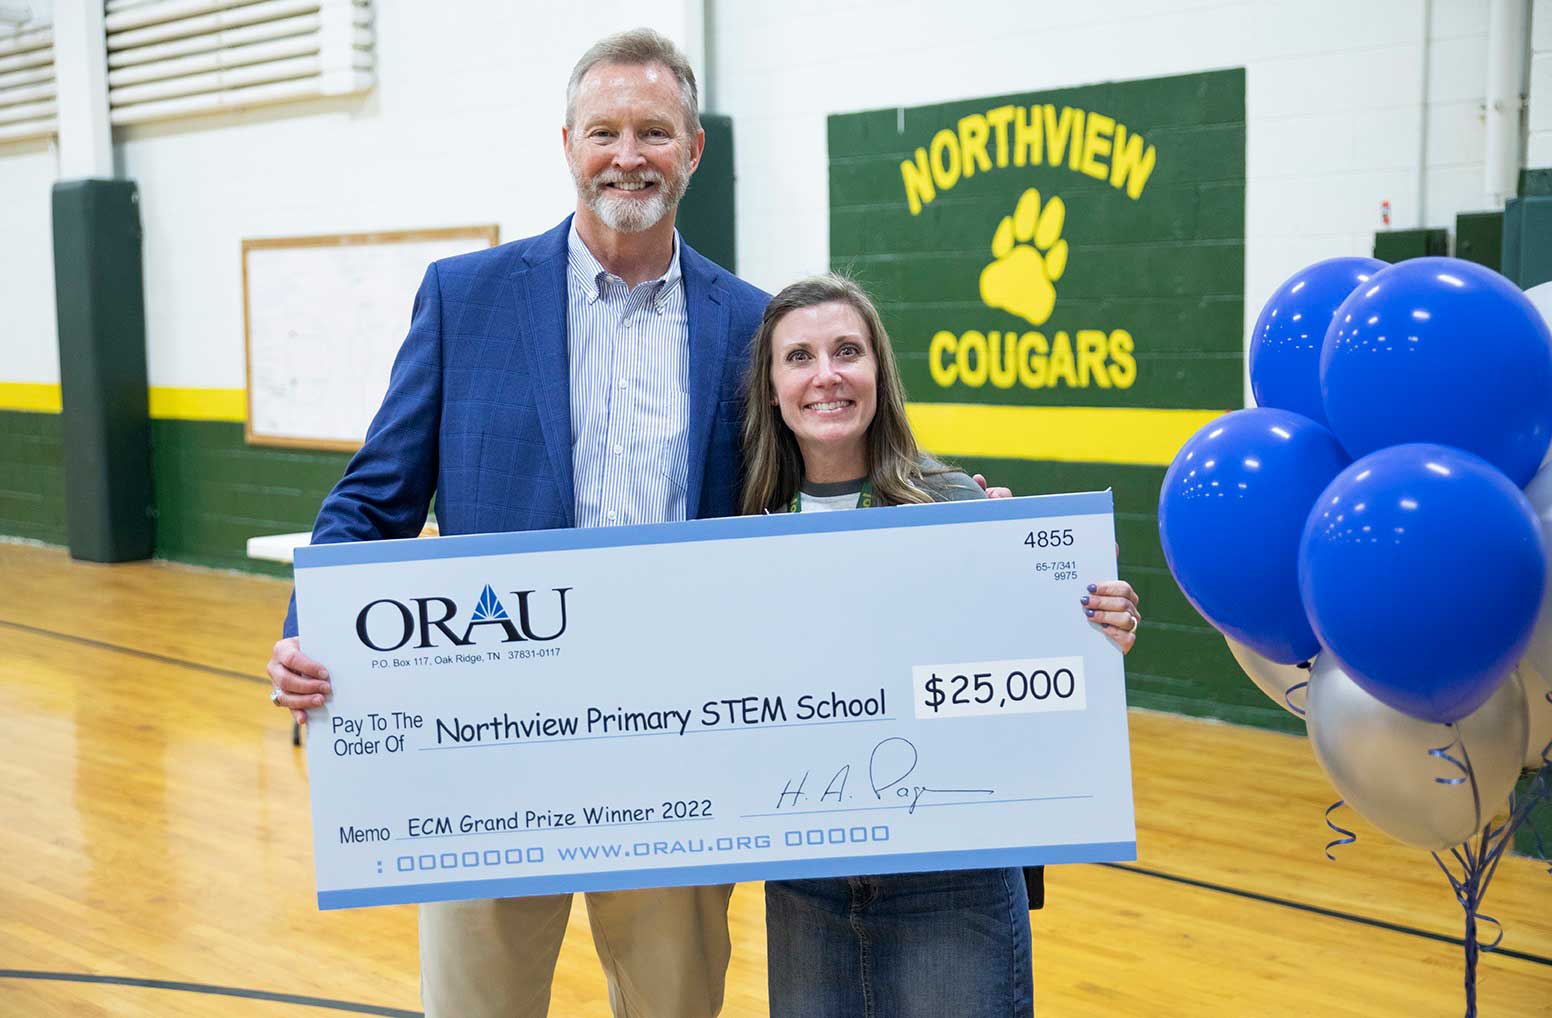 Science teacher surprised beyond words to win ORAU’s Extreme Classroom Makeover